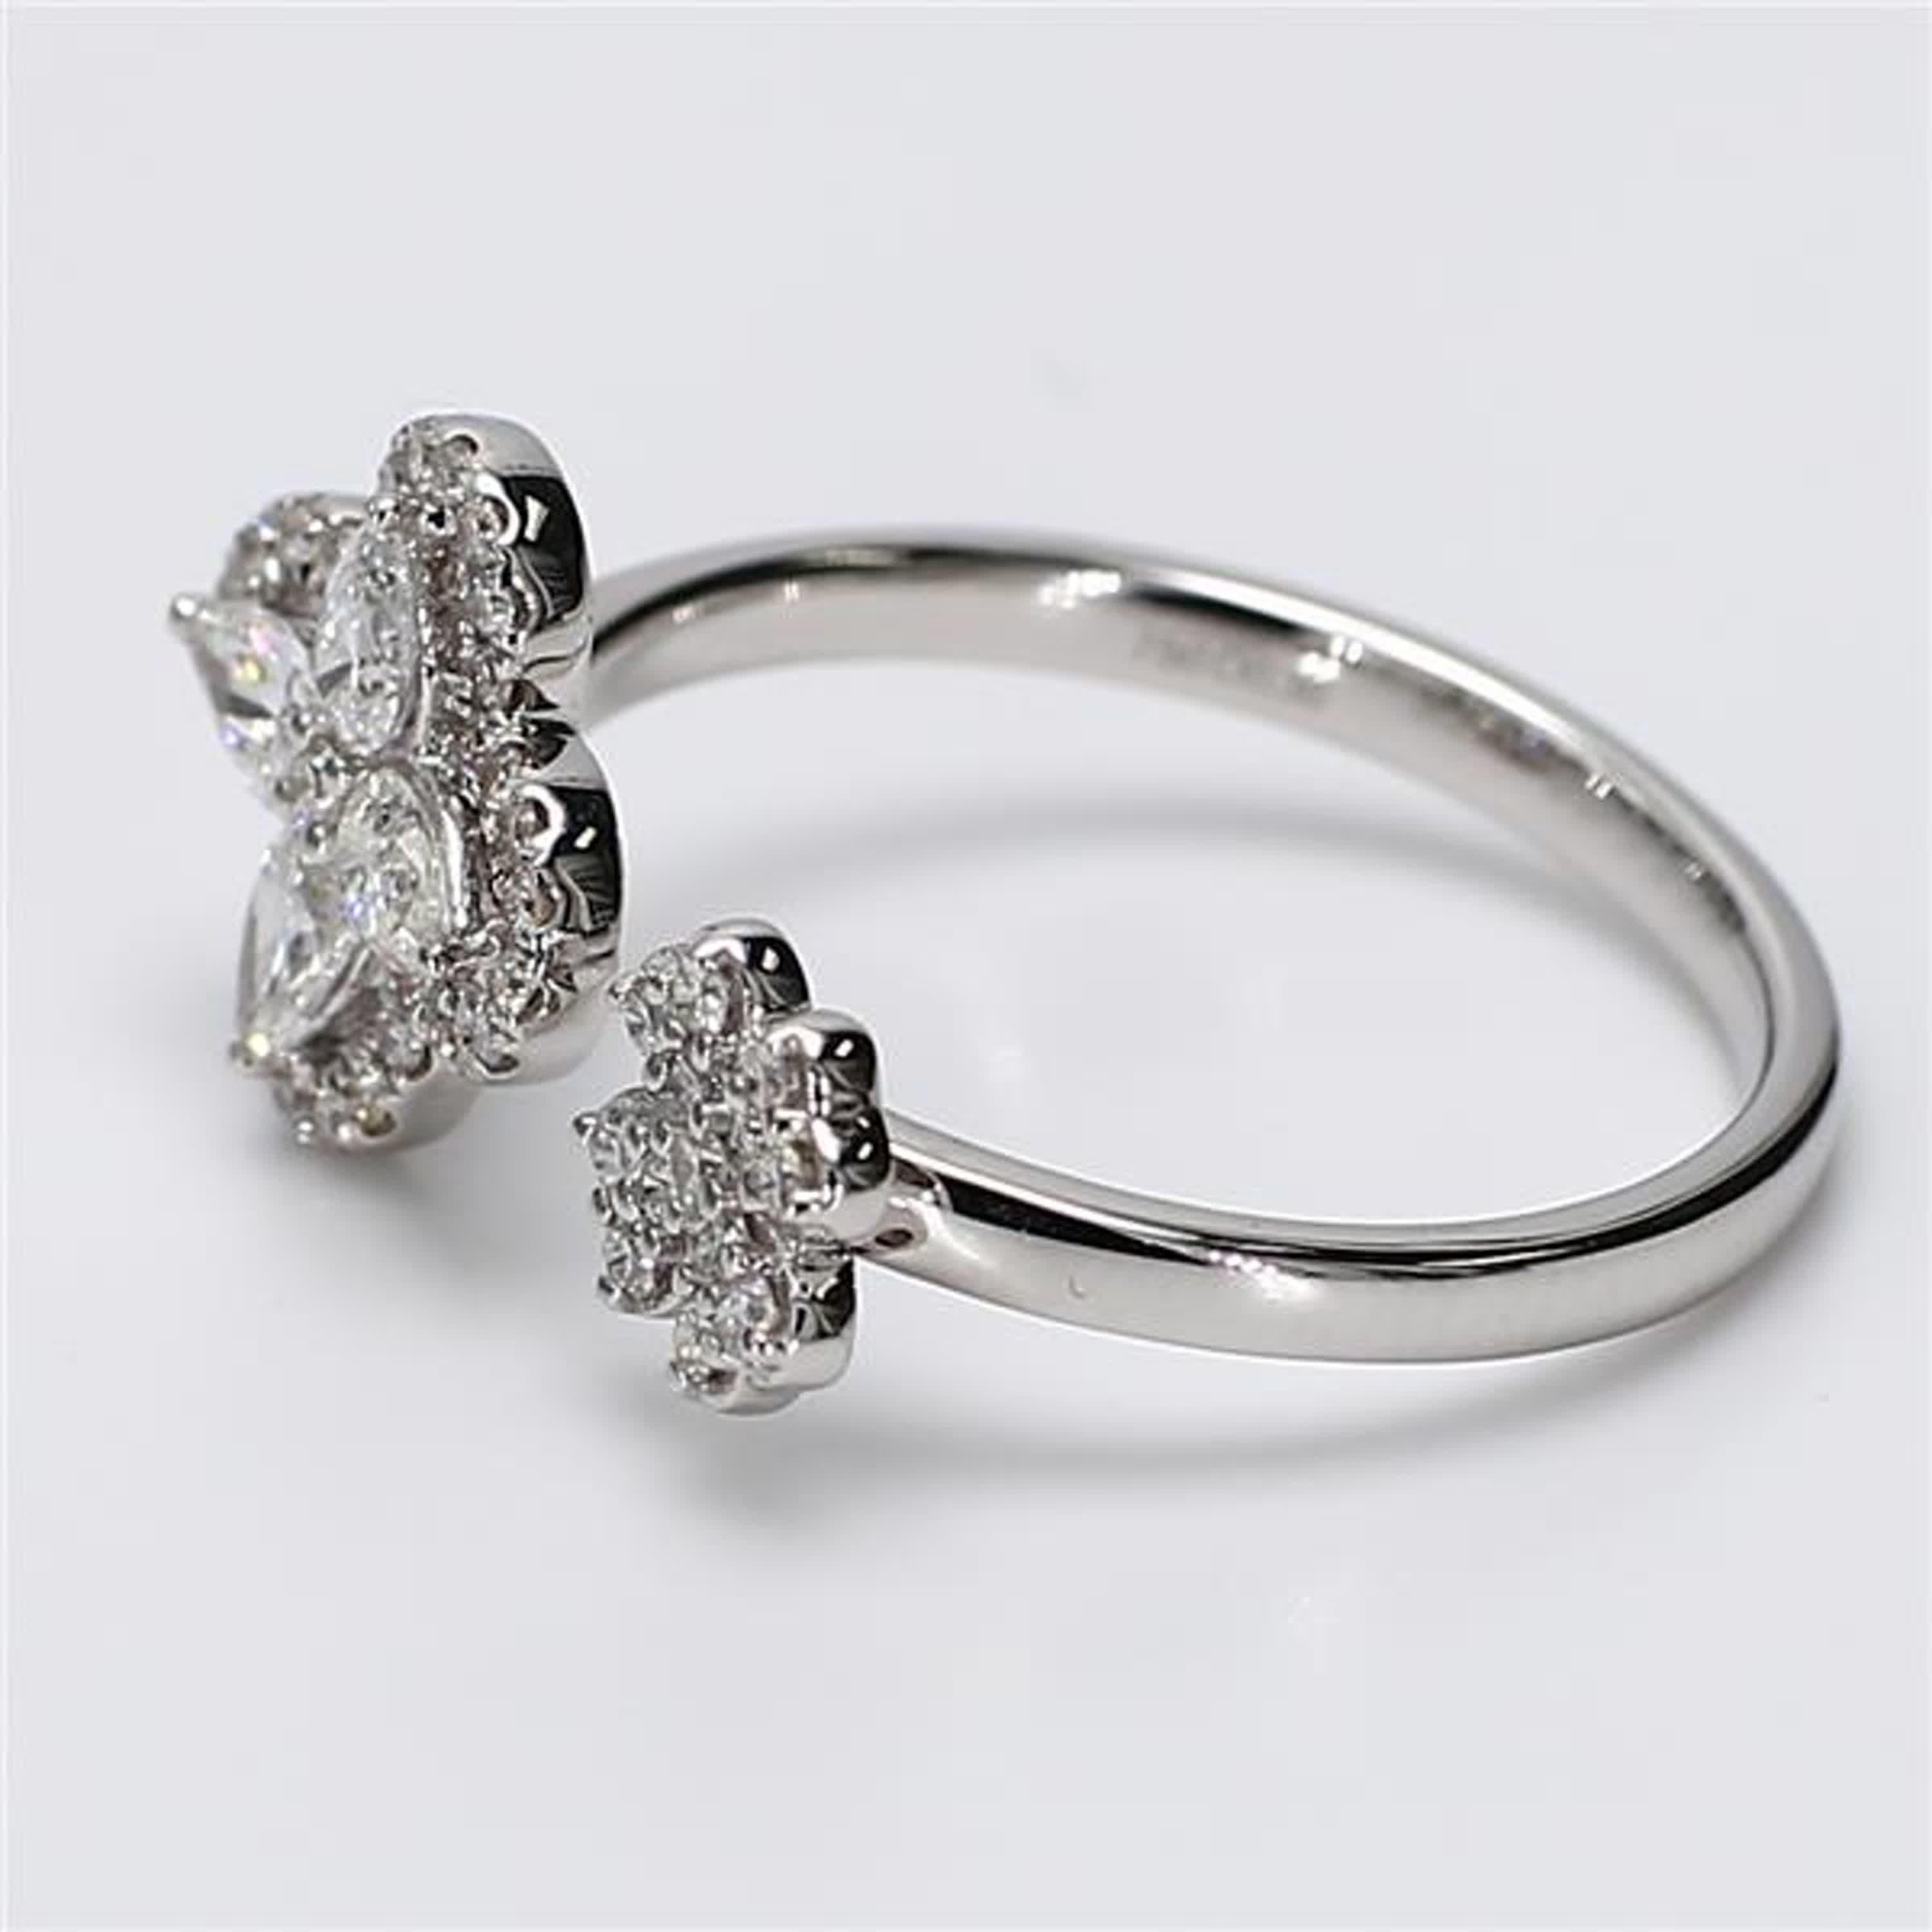 Contemporary Natural White Pear and Round Diamond .60 Carat TW White Gold Fashion Ring